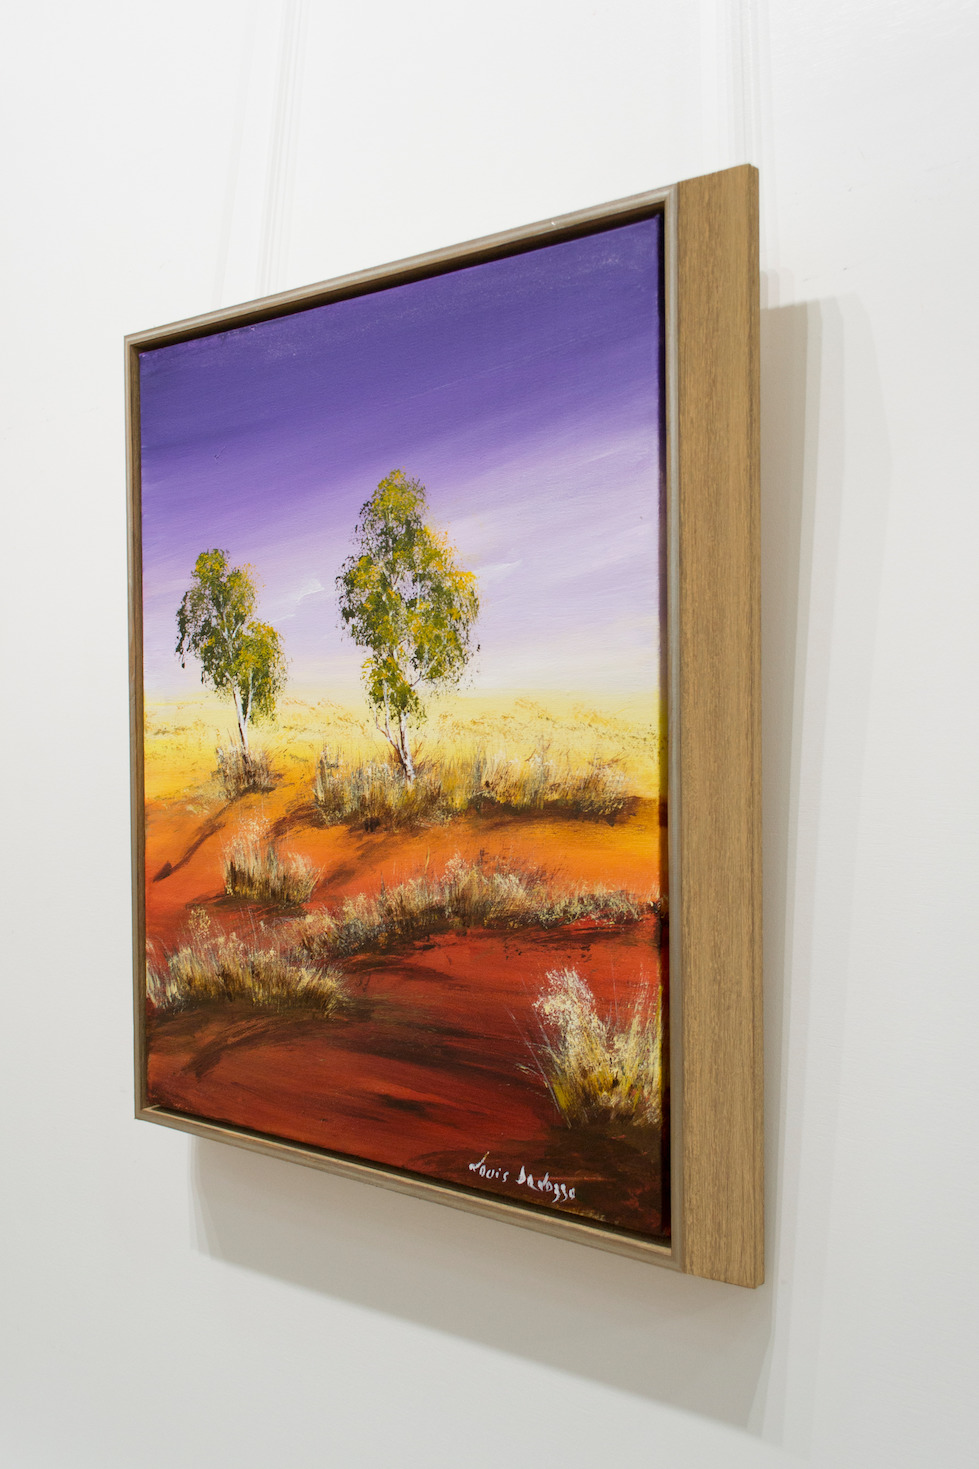 Framed Side View Of Landscape Painting "Lonely Ghost Gum" By Louis Dalozzo